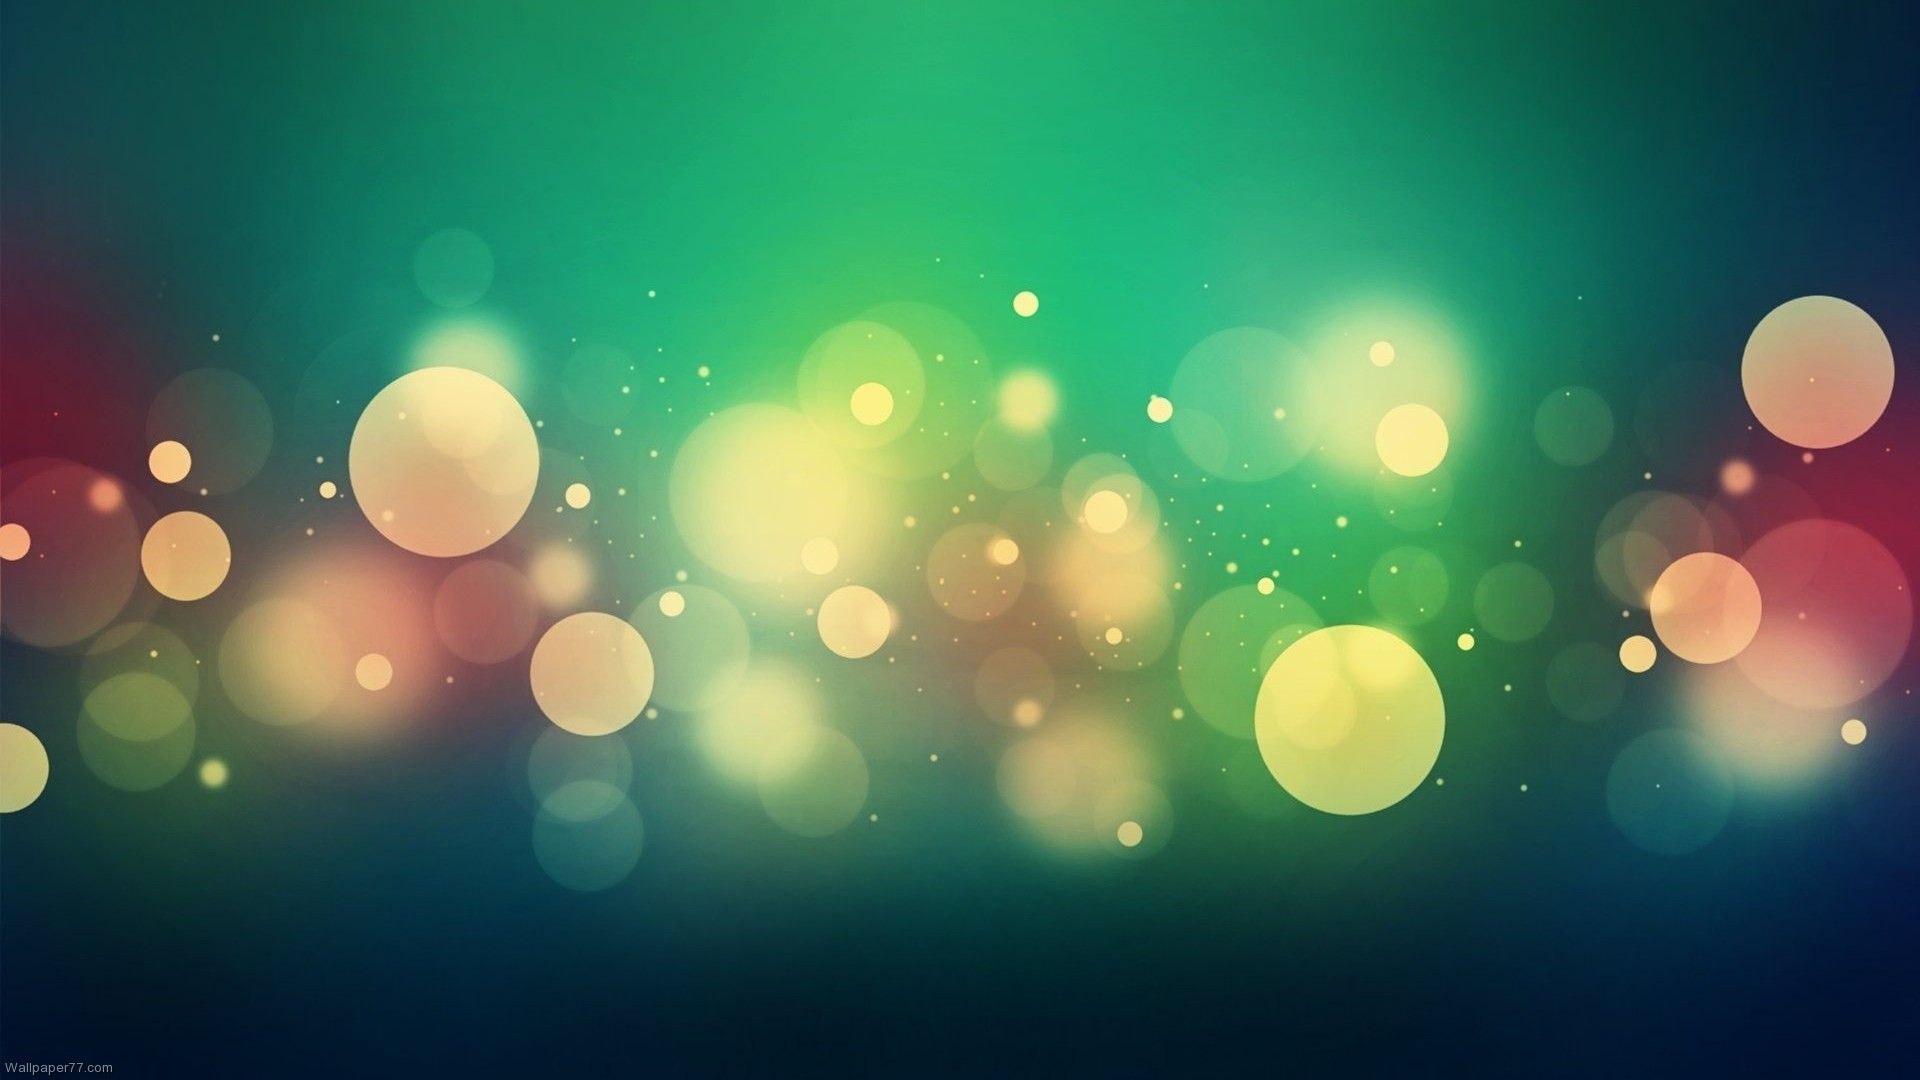 Red Green Dots, 1920x1080 pixels : Wallpapers tagged Abstract ...